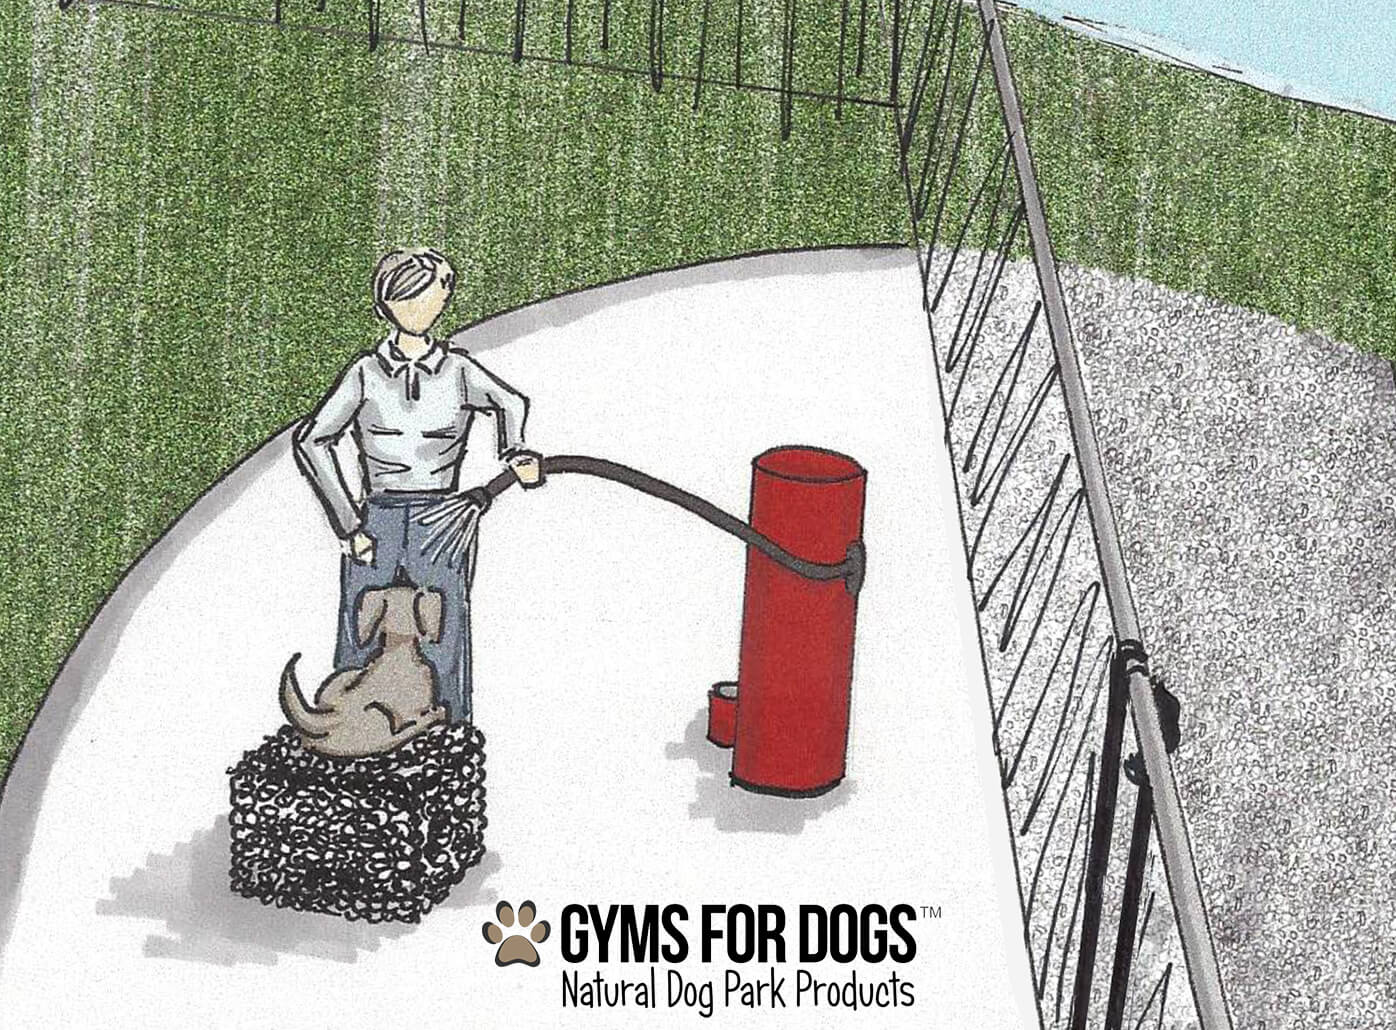 gyms for dogs outdoor dog wash station